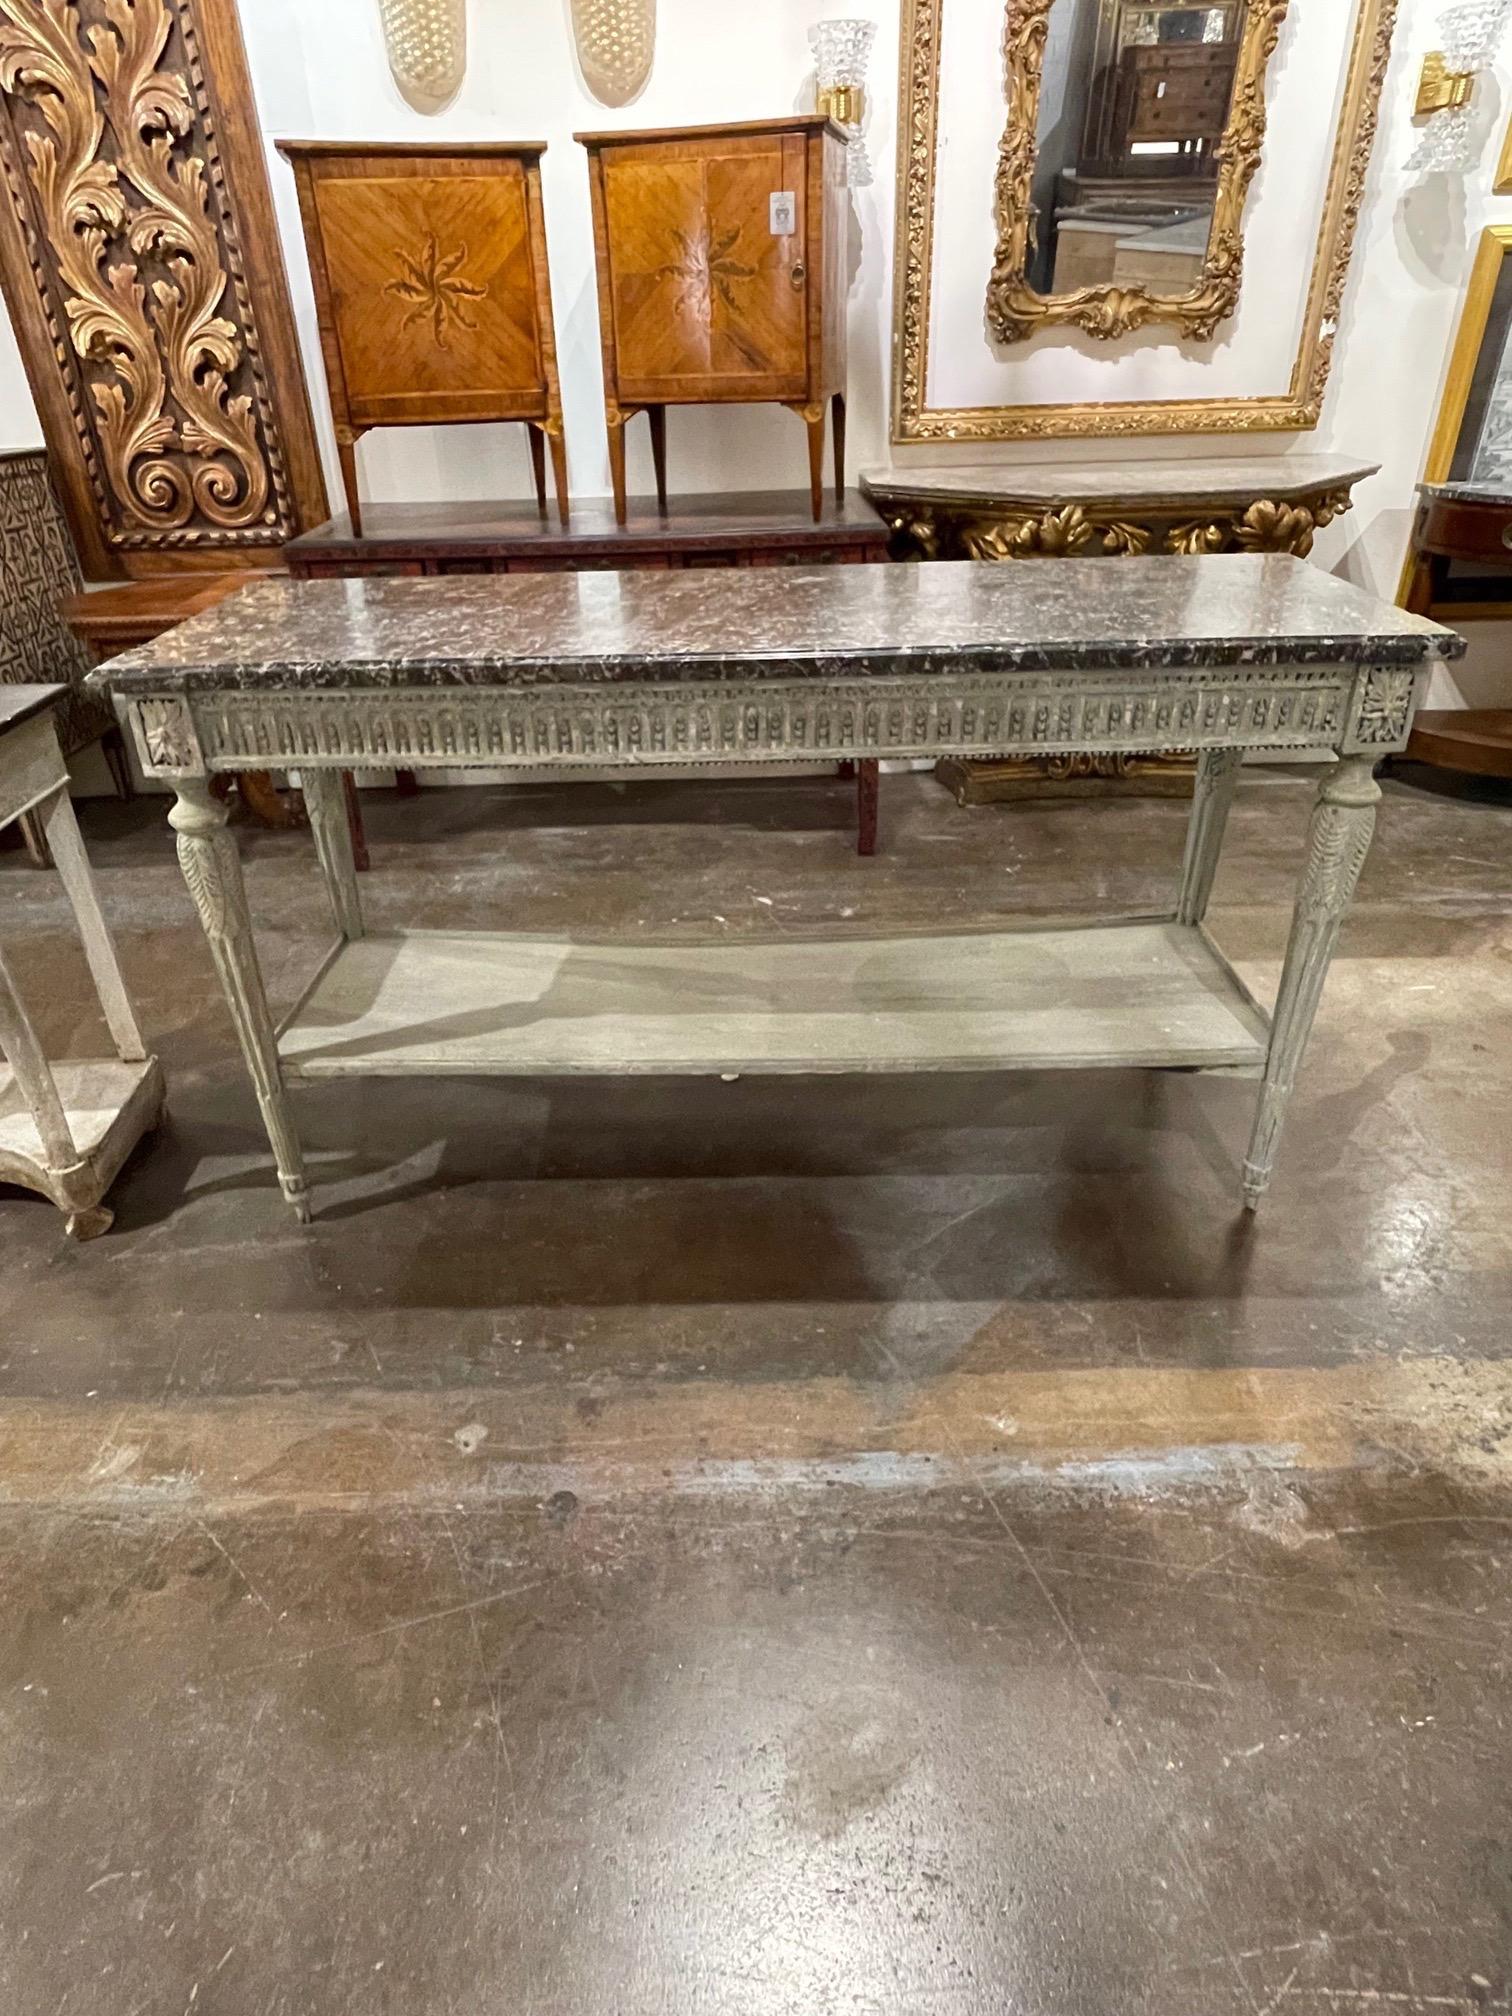 Very special 18th century French Louis XVI carved and painted console with original marble top. Exceptional carvings and beautiful patina! Exquisite!